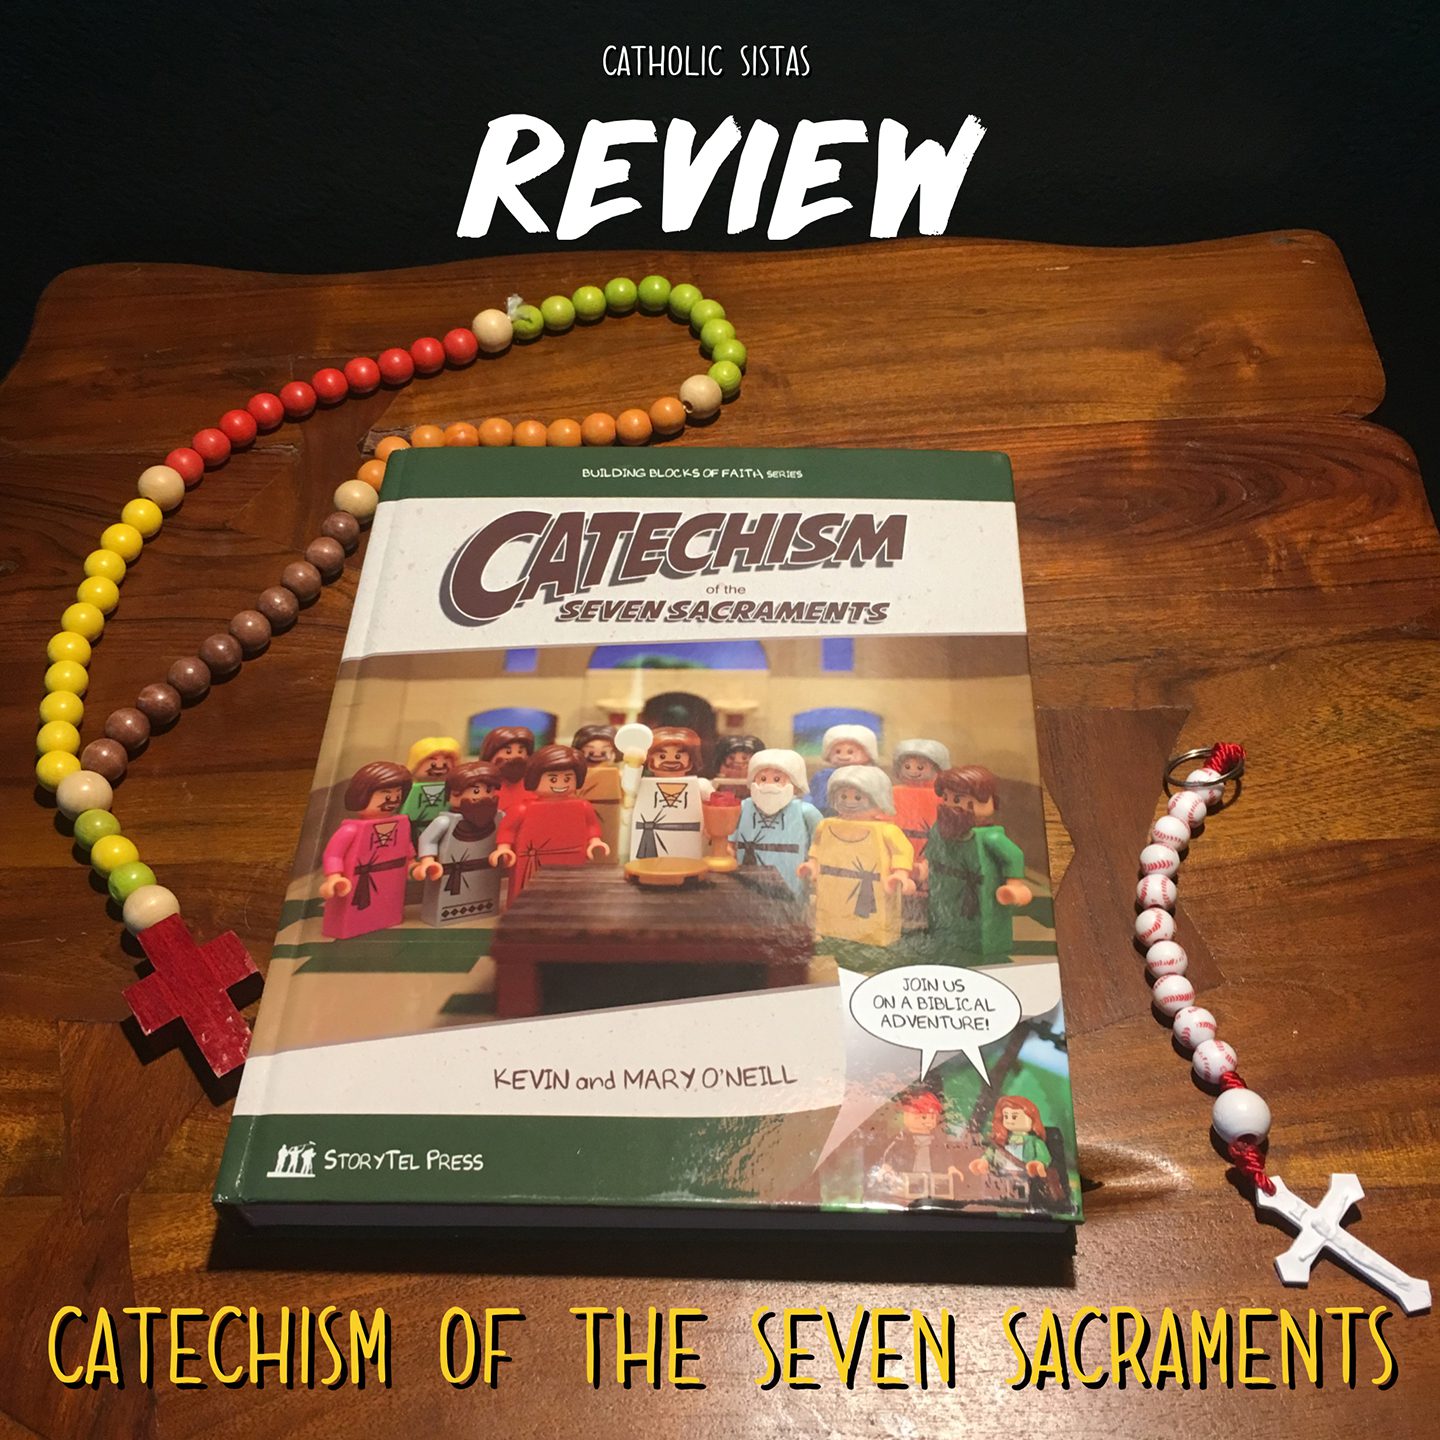 REVIEW: Catechism of the Seven Sacraments